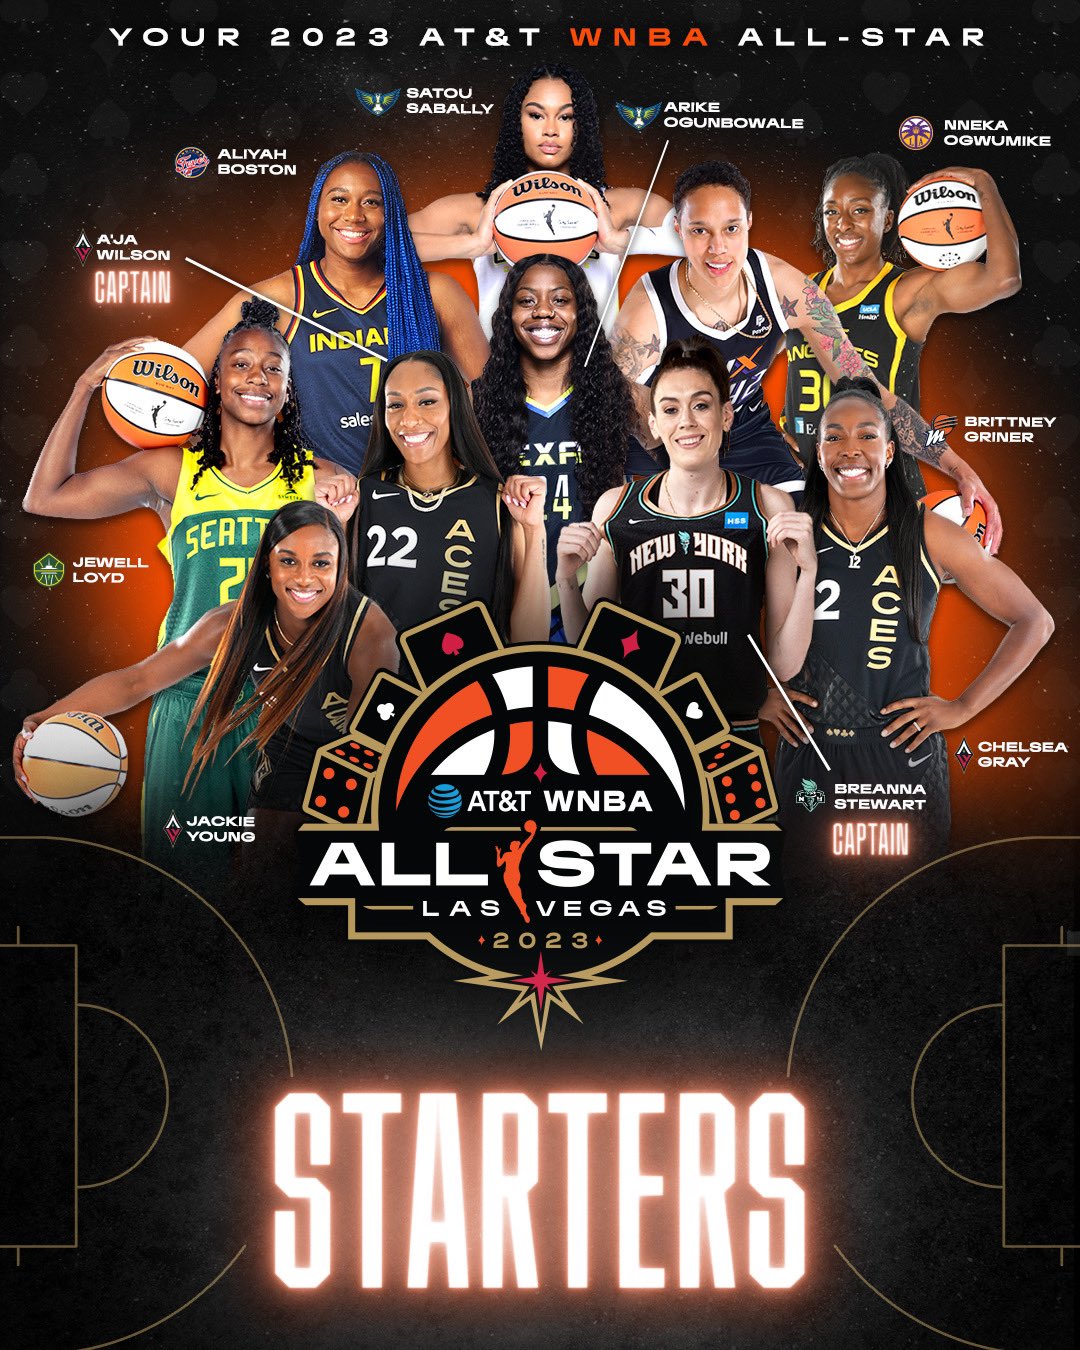 WNBA announces starters for the 2023 All-Star Game in Las Vegas